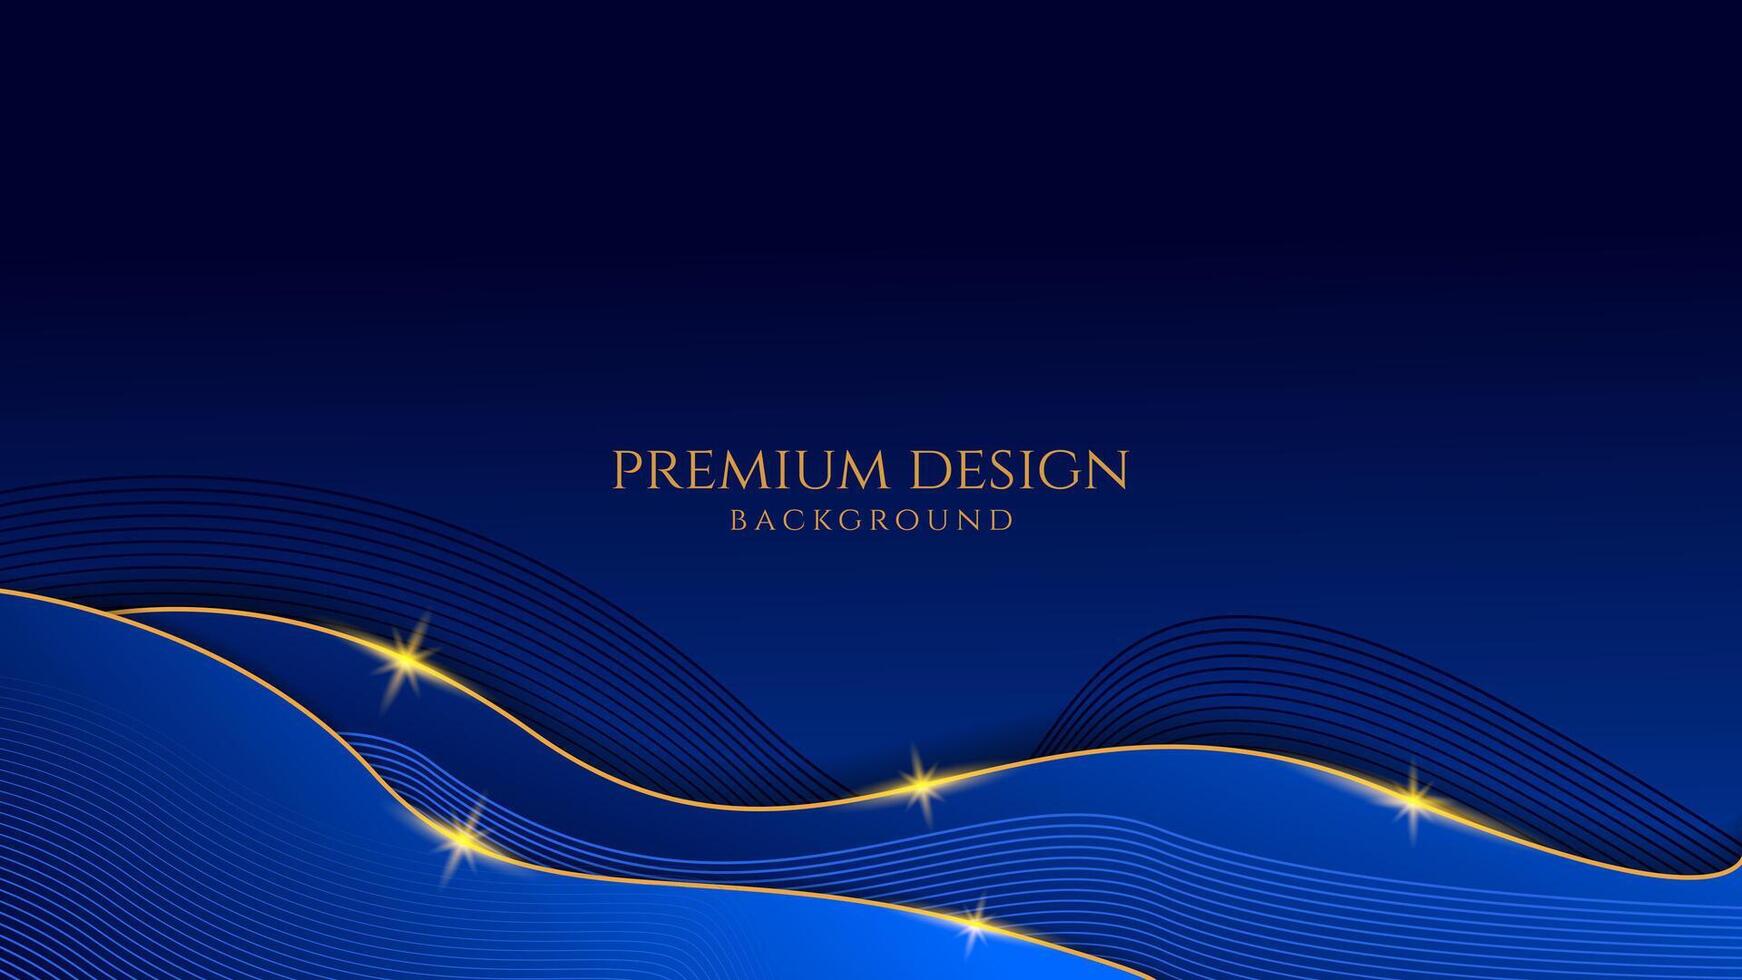 Dark blue luxury premium background with shining gold line waves, suitable for banners, wallpapers, brochures and posters. Vector illustration